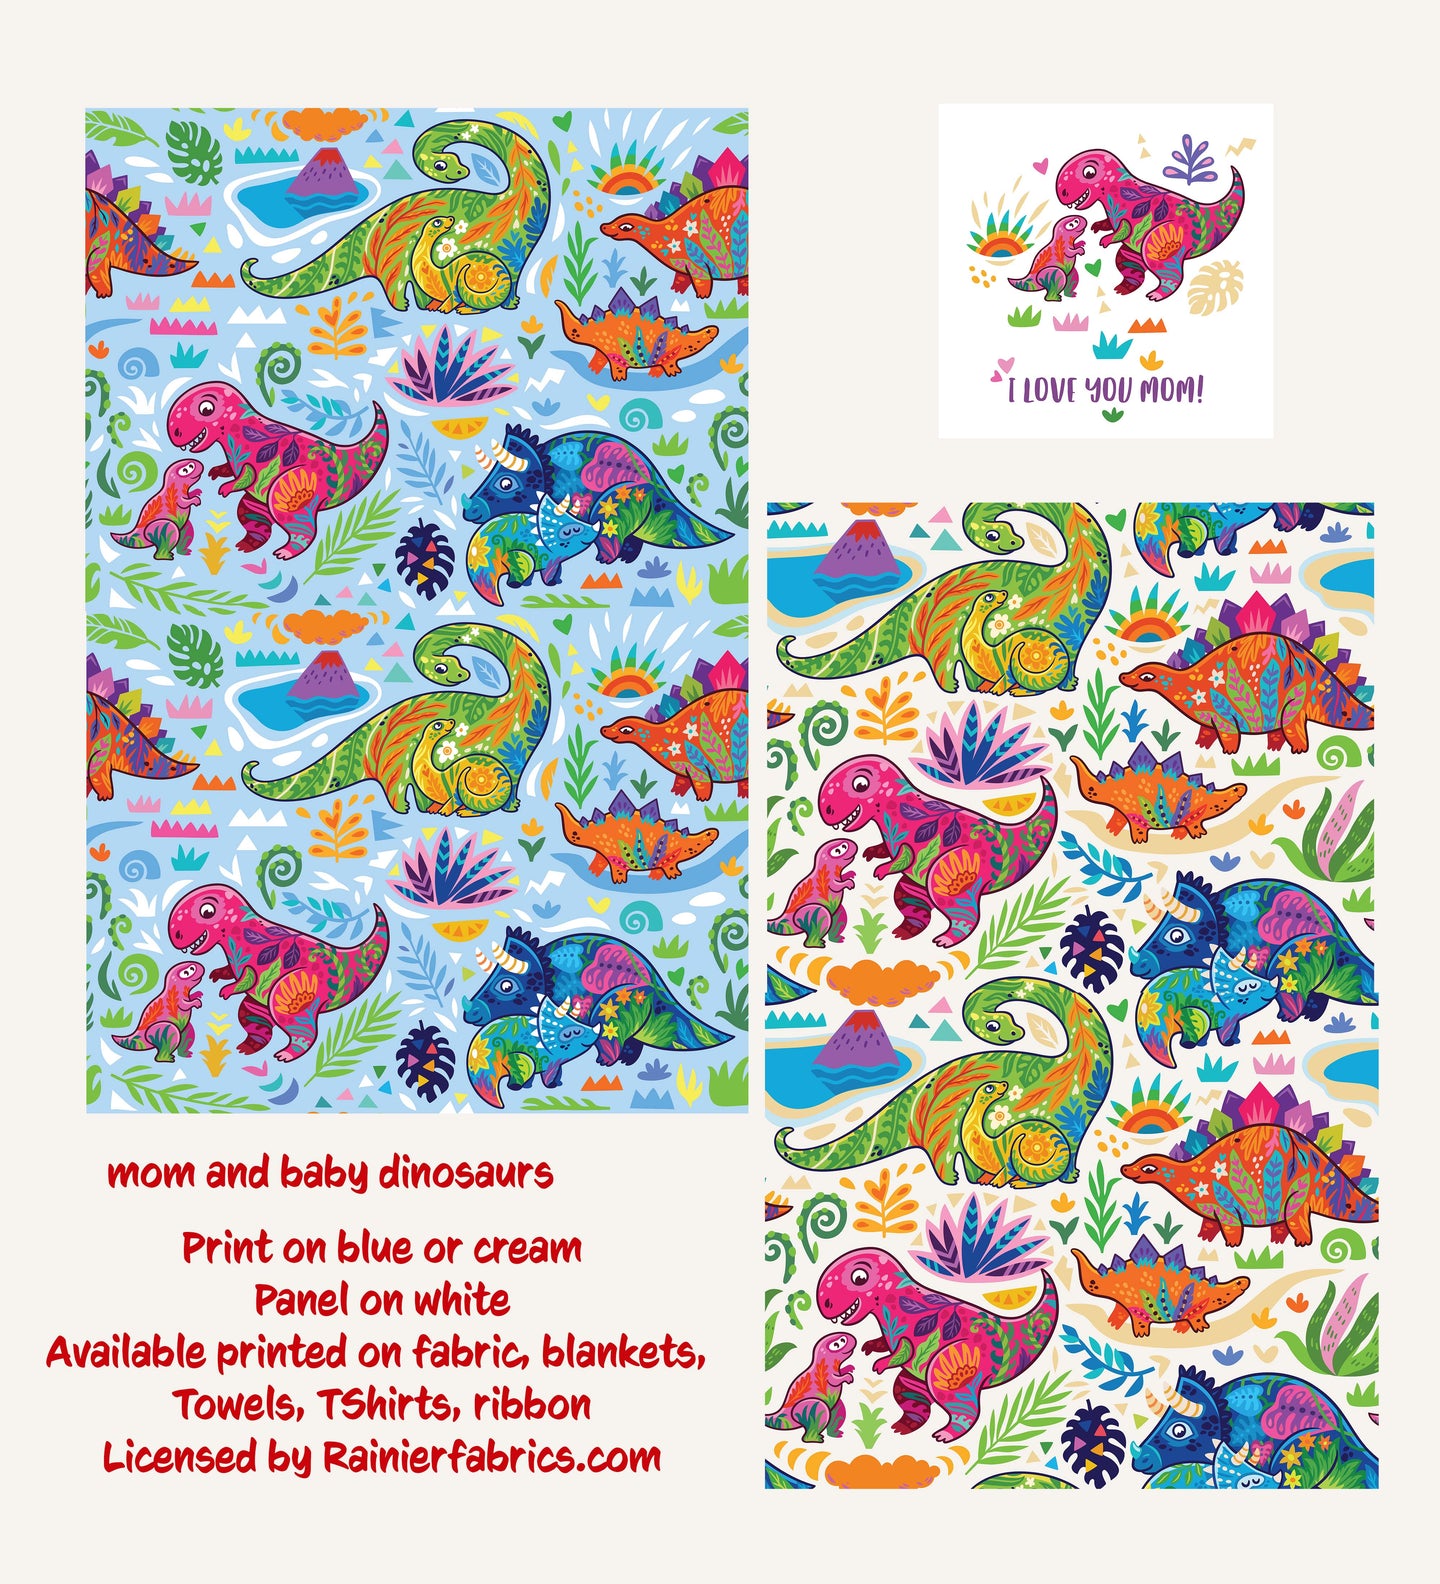 Mom and baby dinos - 2-5 day turnaround - Order by 1/2 yard; Description of bases below